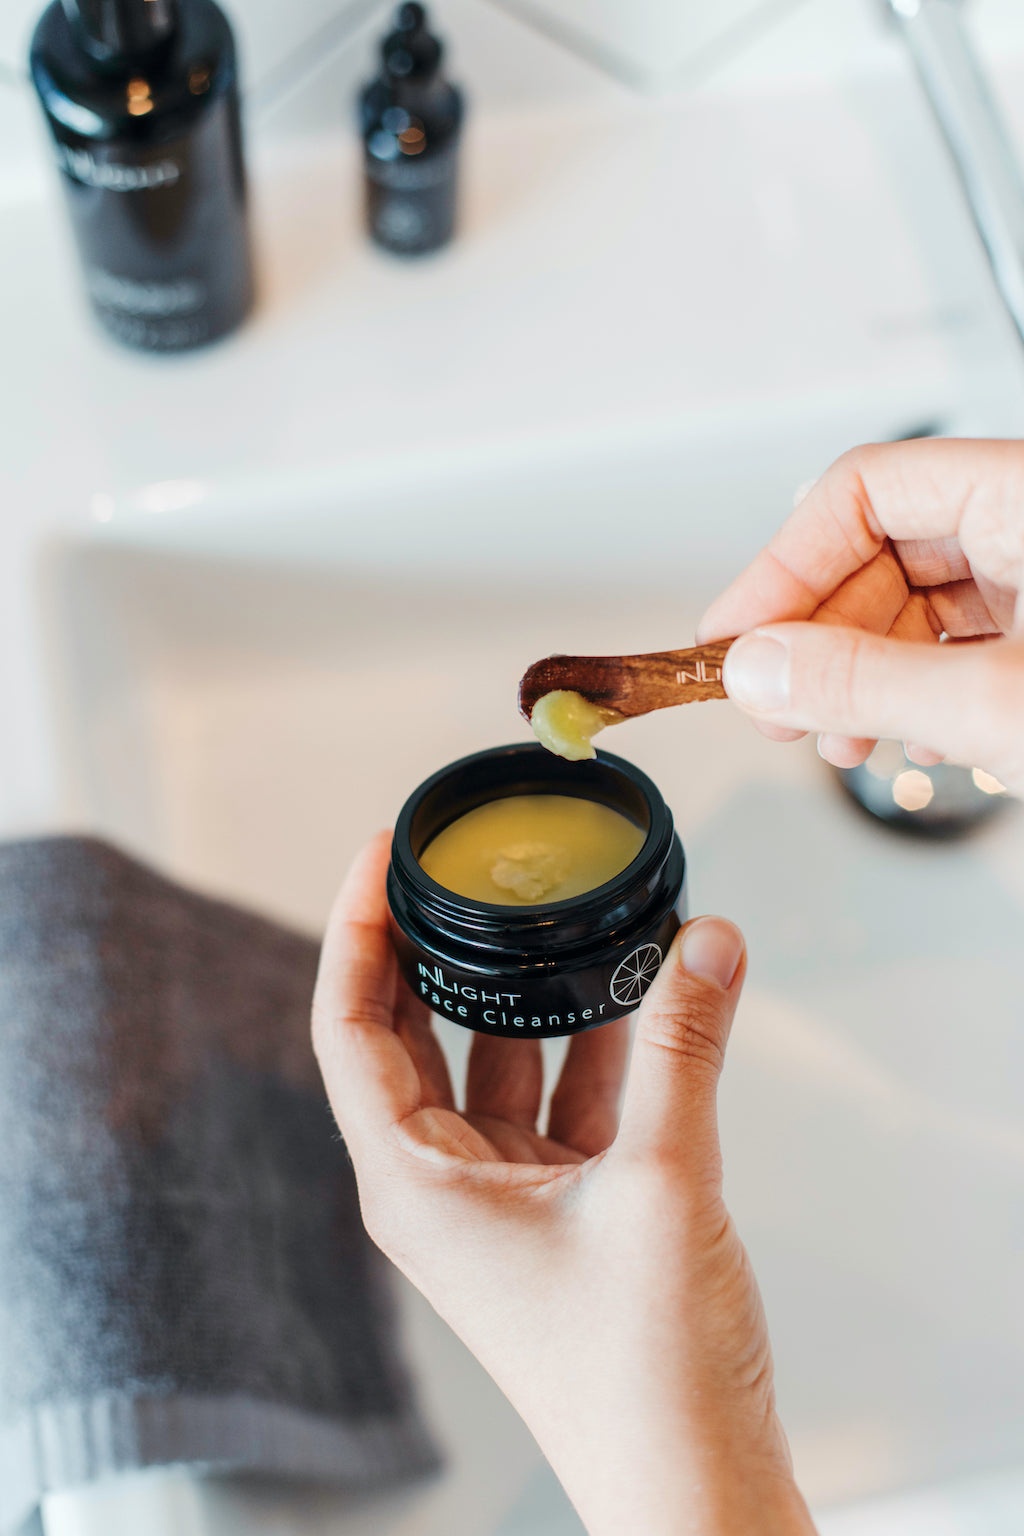 lifestyle photo of inlight beauty's 100% organic cleansing balm. the cleansing balm is being held in someone's hands. in the left hand is the open black glass jar and you can see the golden coloured balm inside. in the right hand is a wooden spatula with some cleansing balm on it. the jar is being held over a sink and you can see blurred in the background a grey towel draped over the white sink and some other black glass bottles of inlight beauty products